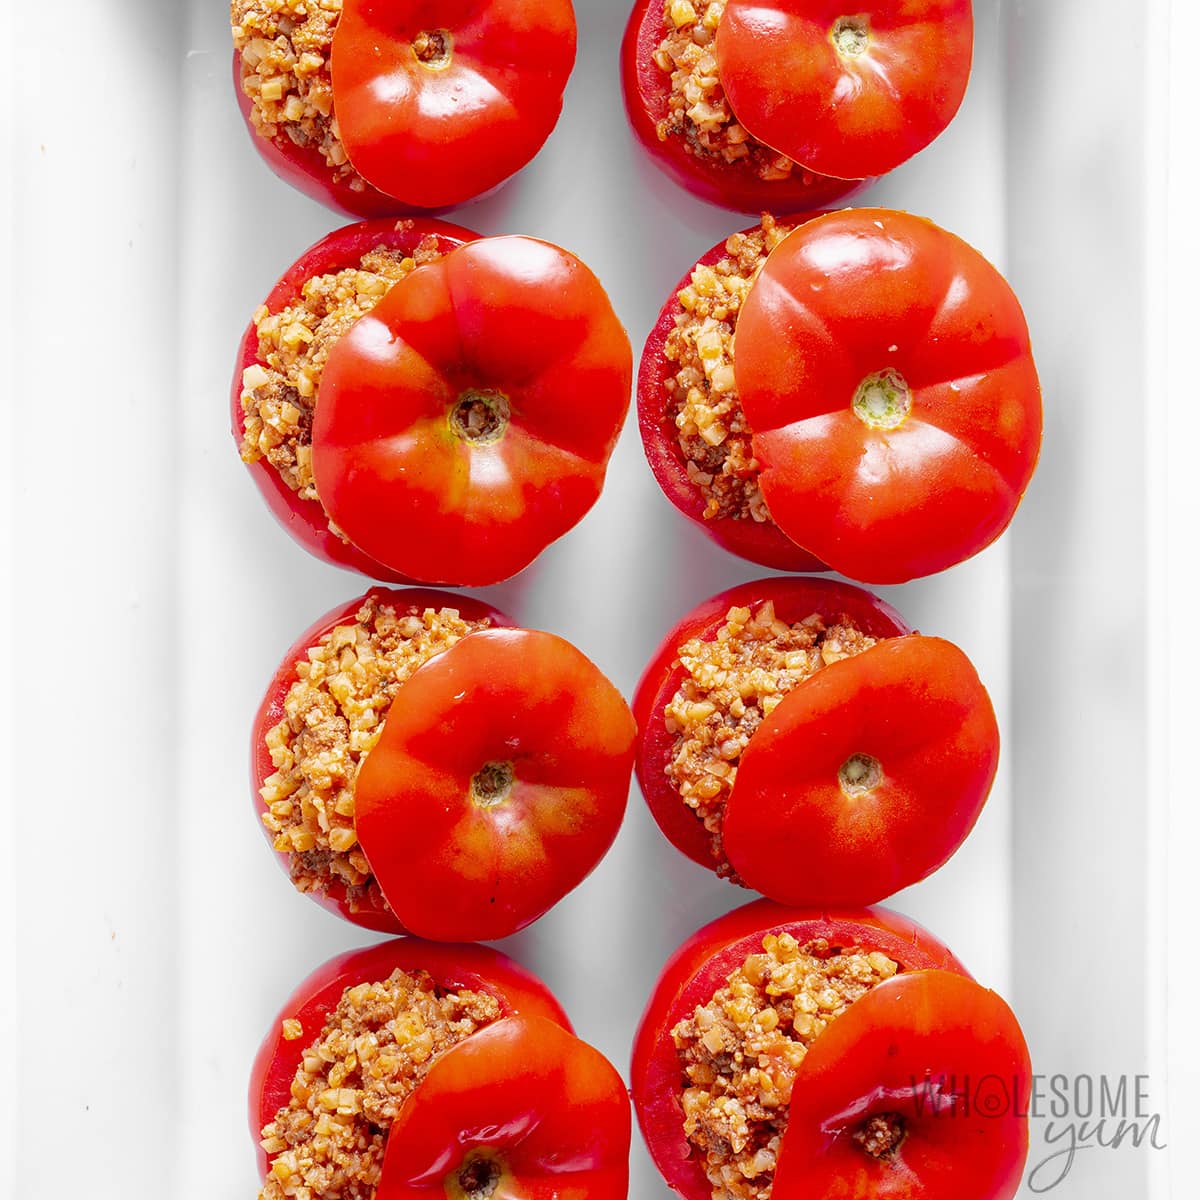 Tomato lids placed on top of stuffed tomatoes.